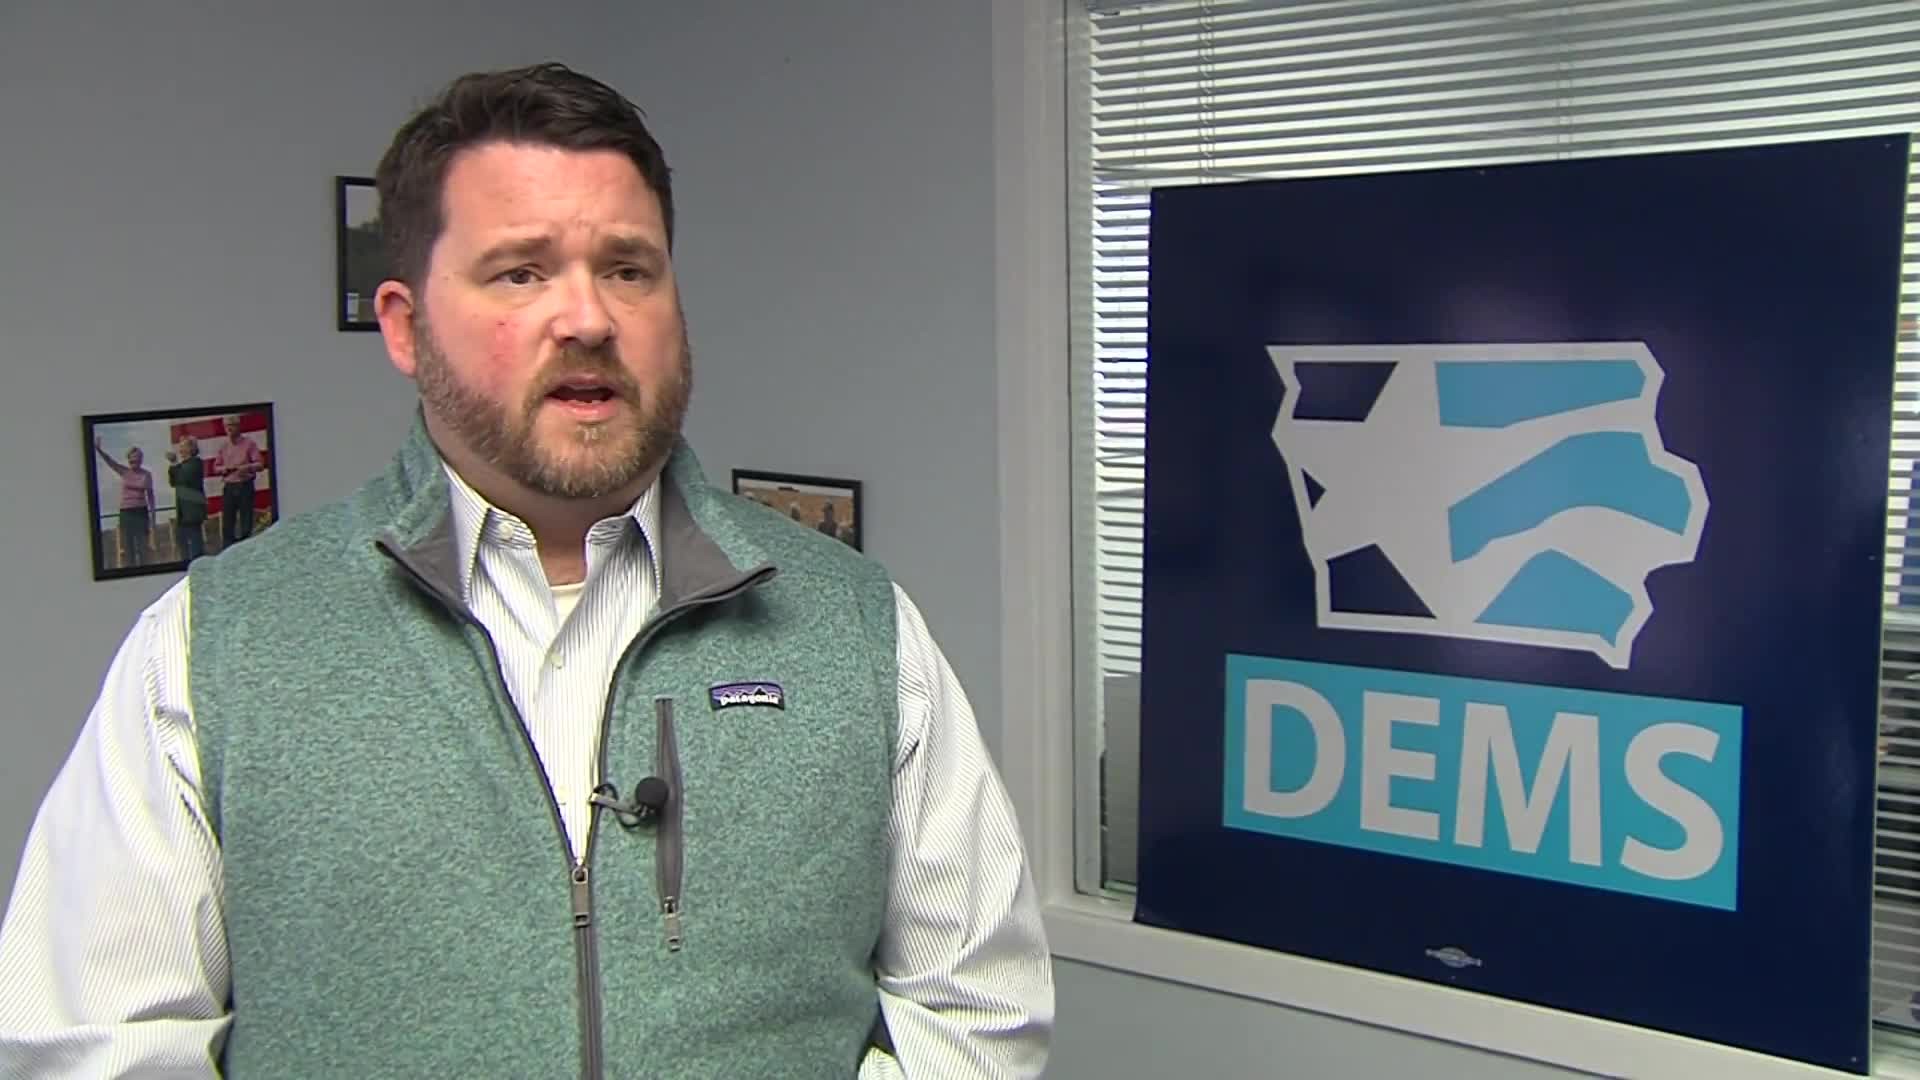 Iowa Democratic Party outlines security plans for caucus